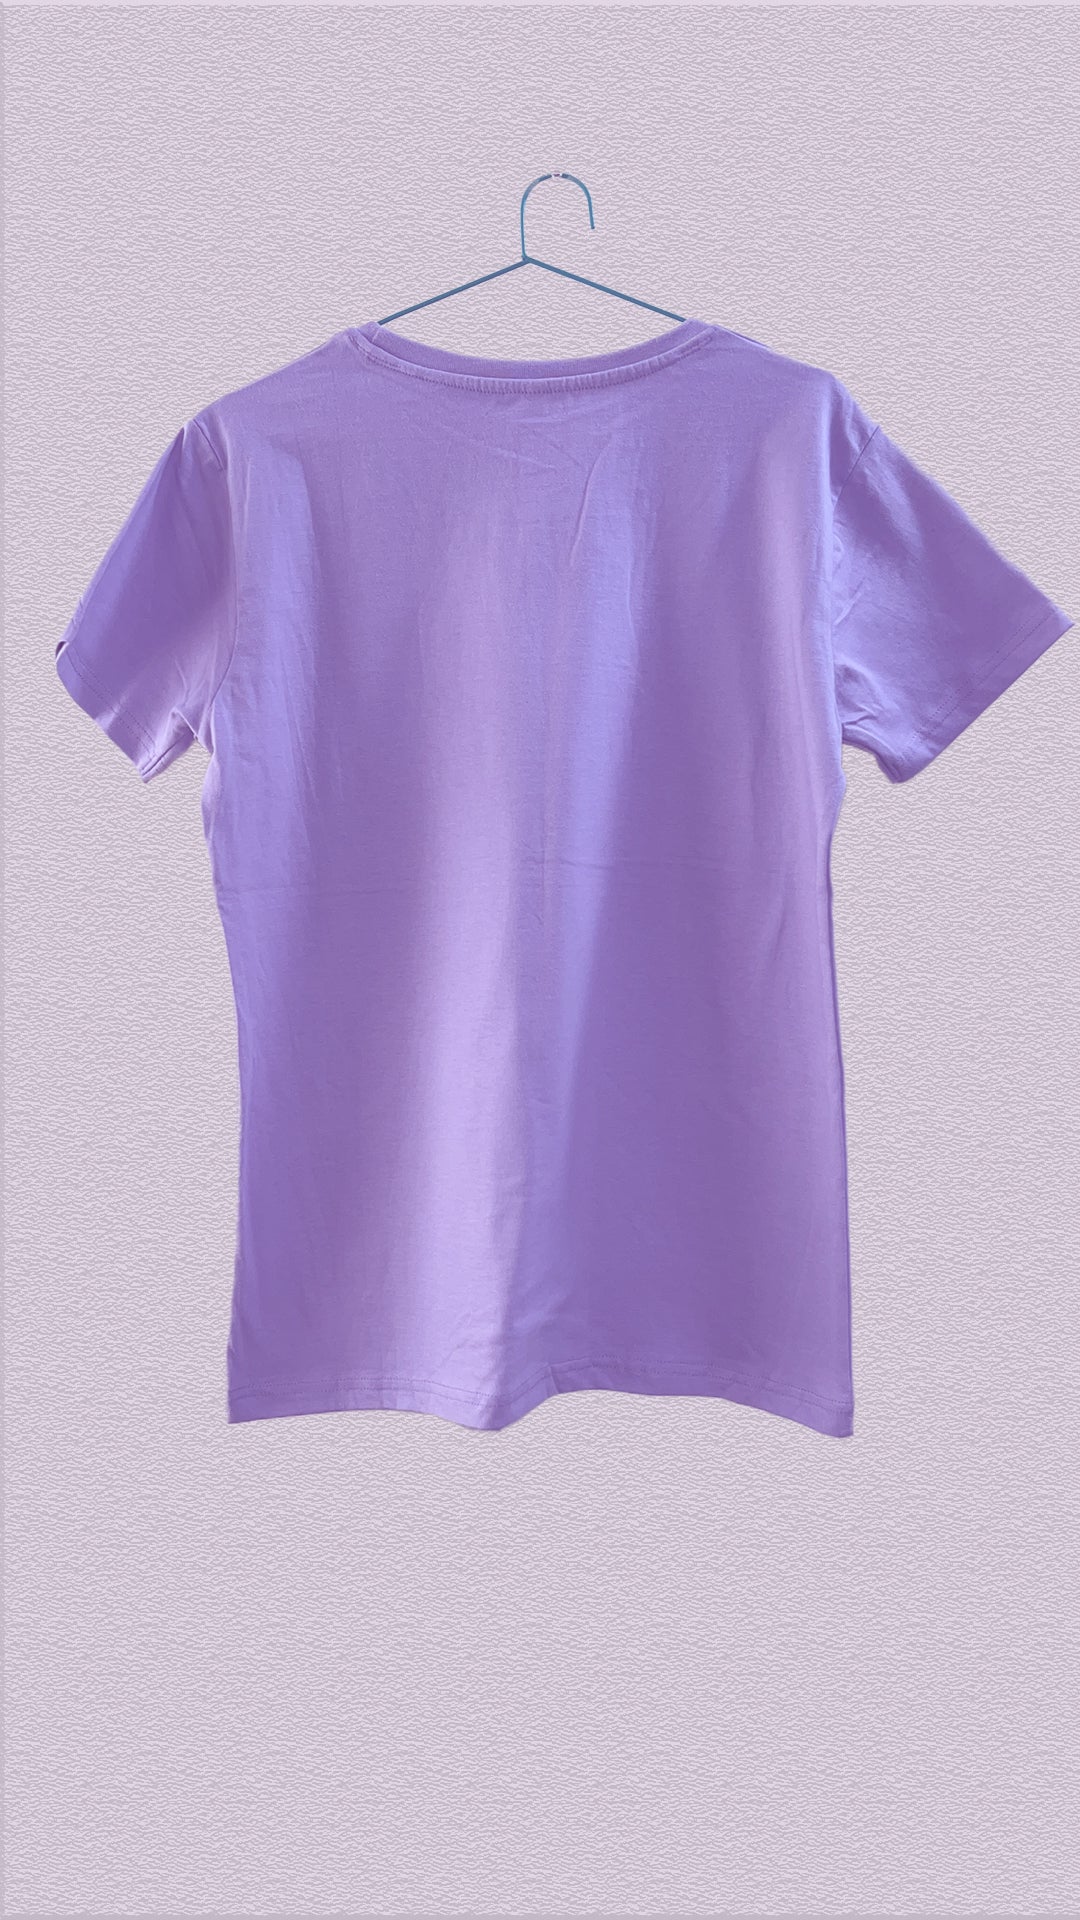 Women's Round Neck Solid Color Tee Shirt - Lavender